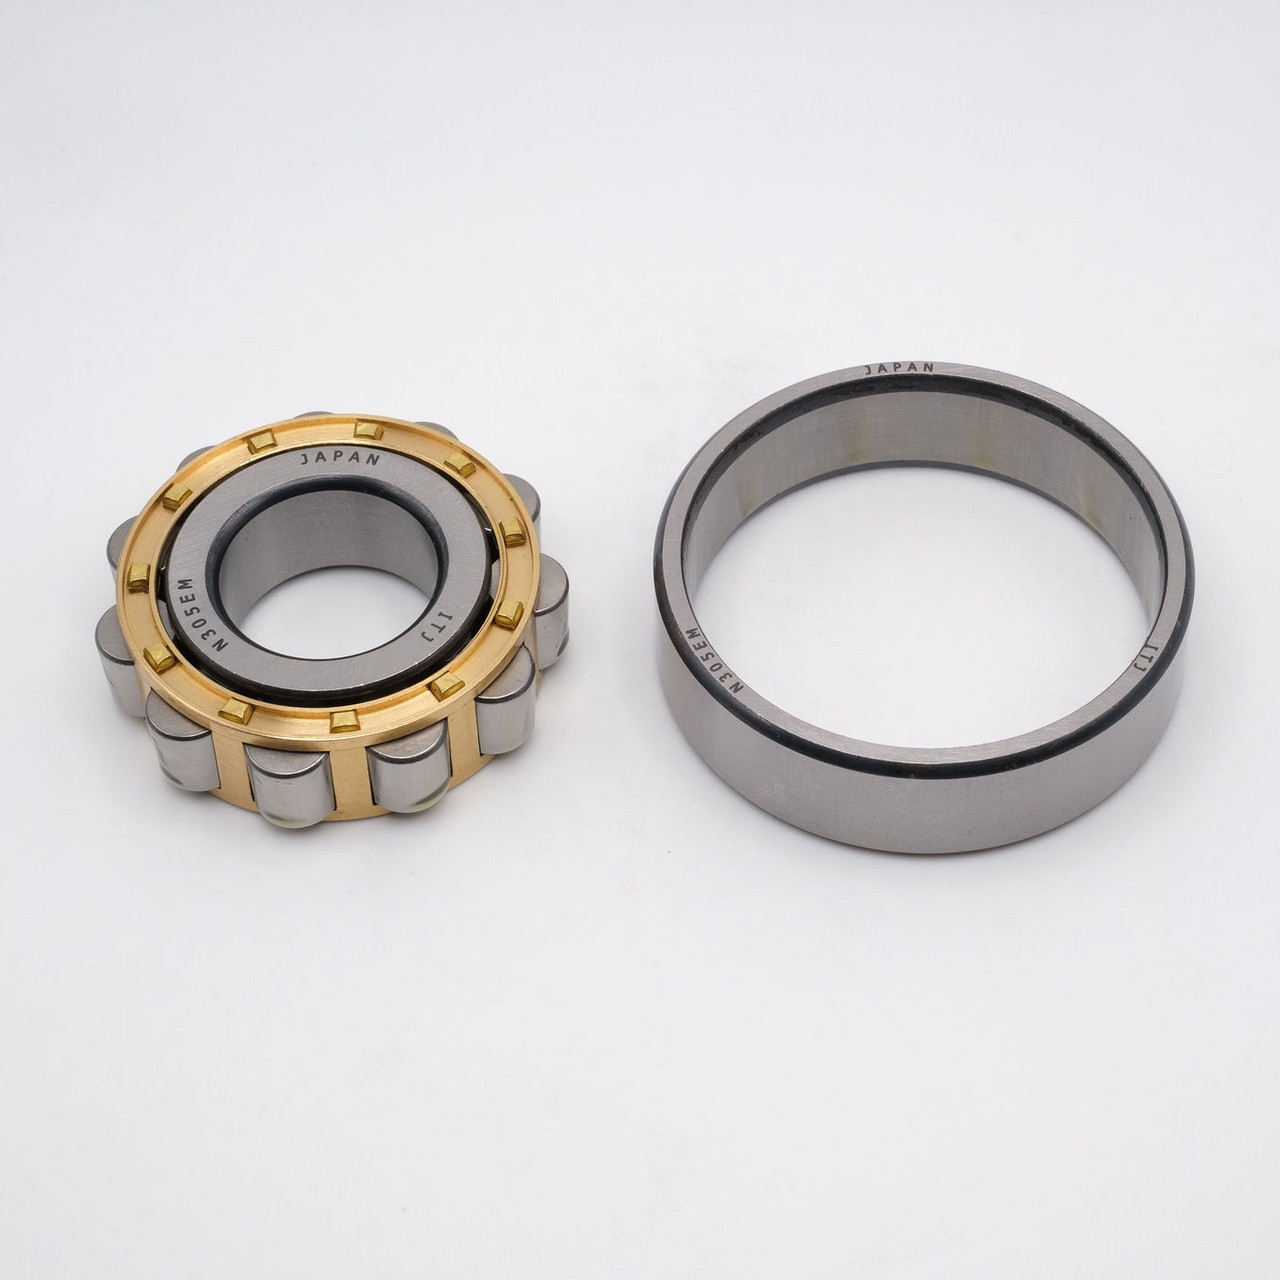 N207EMC3 Cylindrical Roller Bearing Brass Cage 35x72x17 Separated View